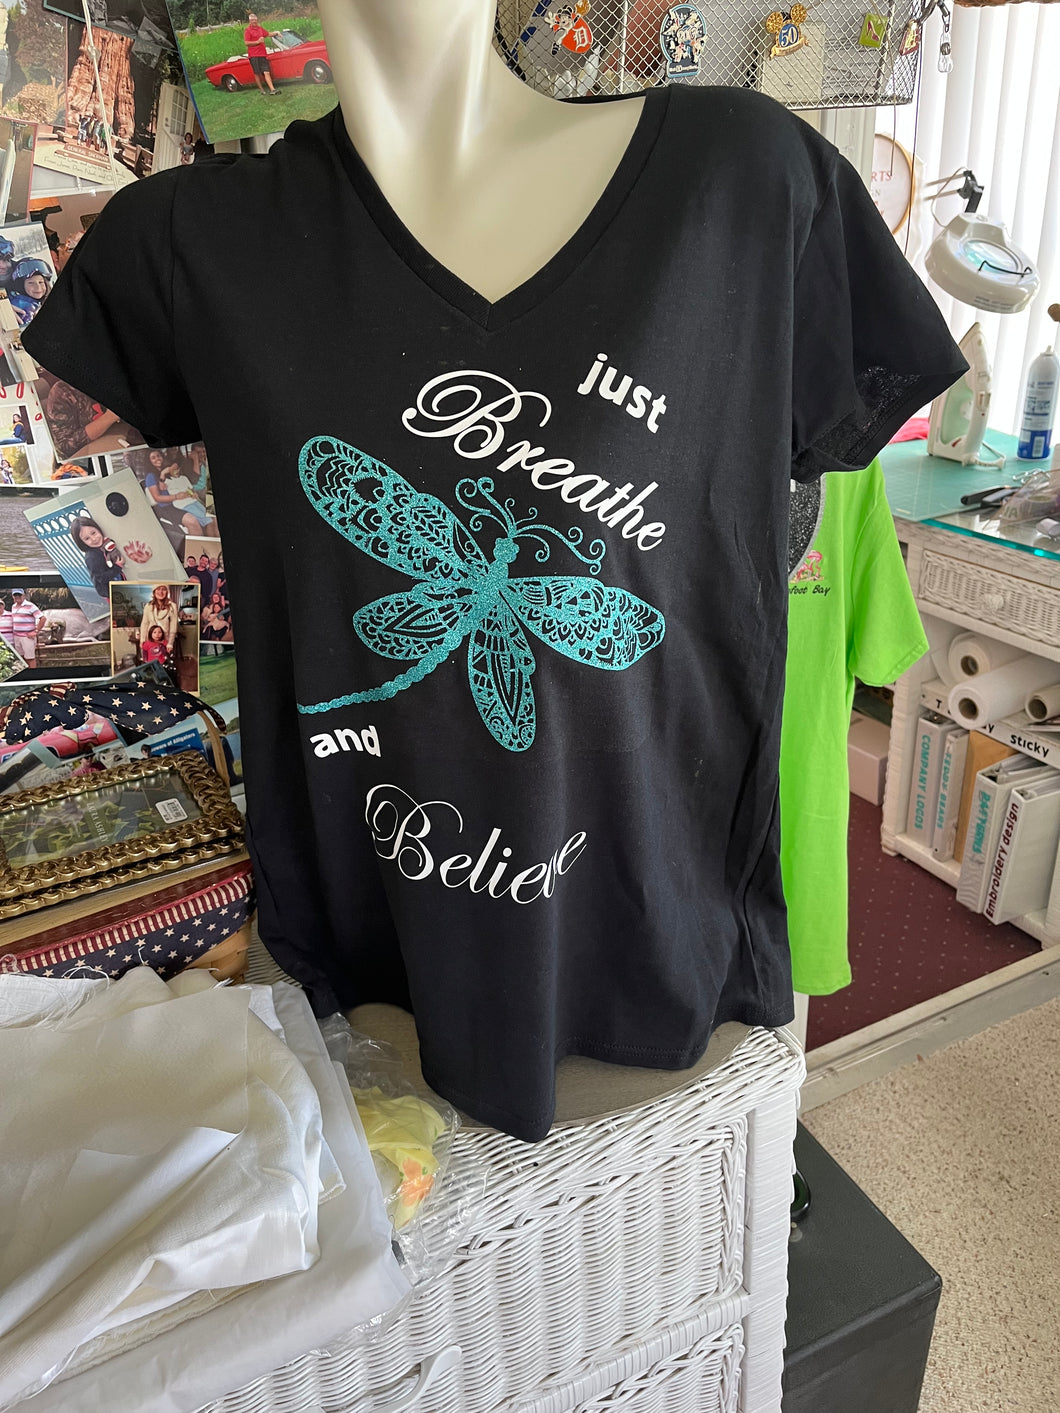 Just Breath and Believe v neck ladies Tee Shirt